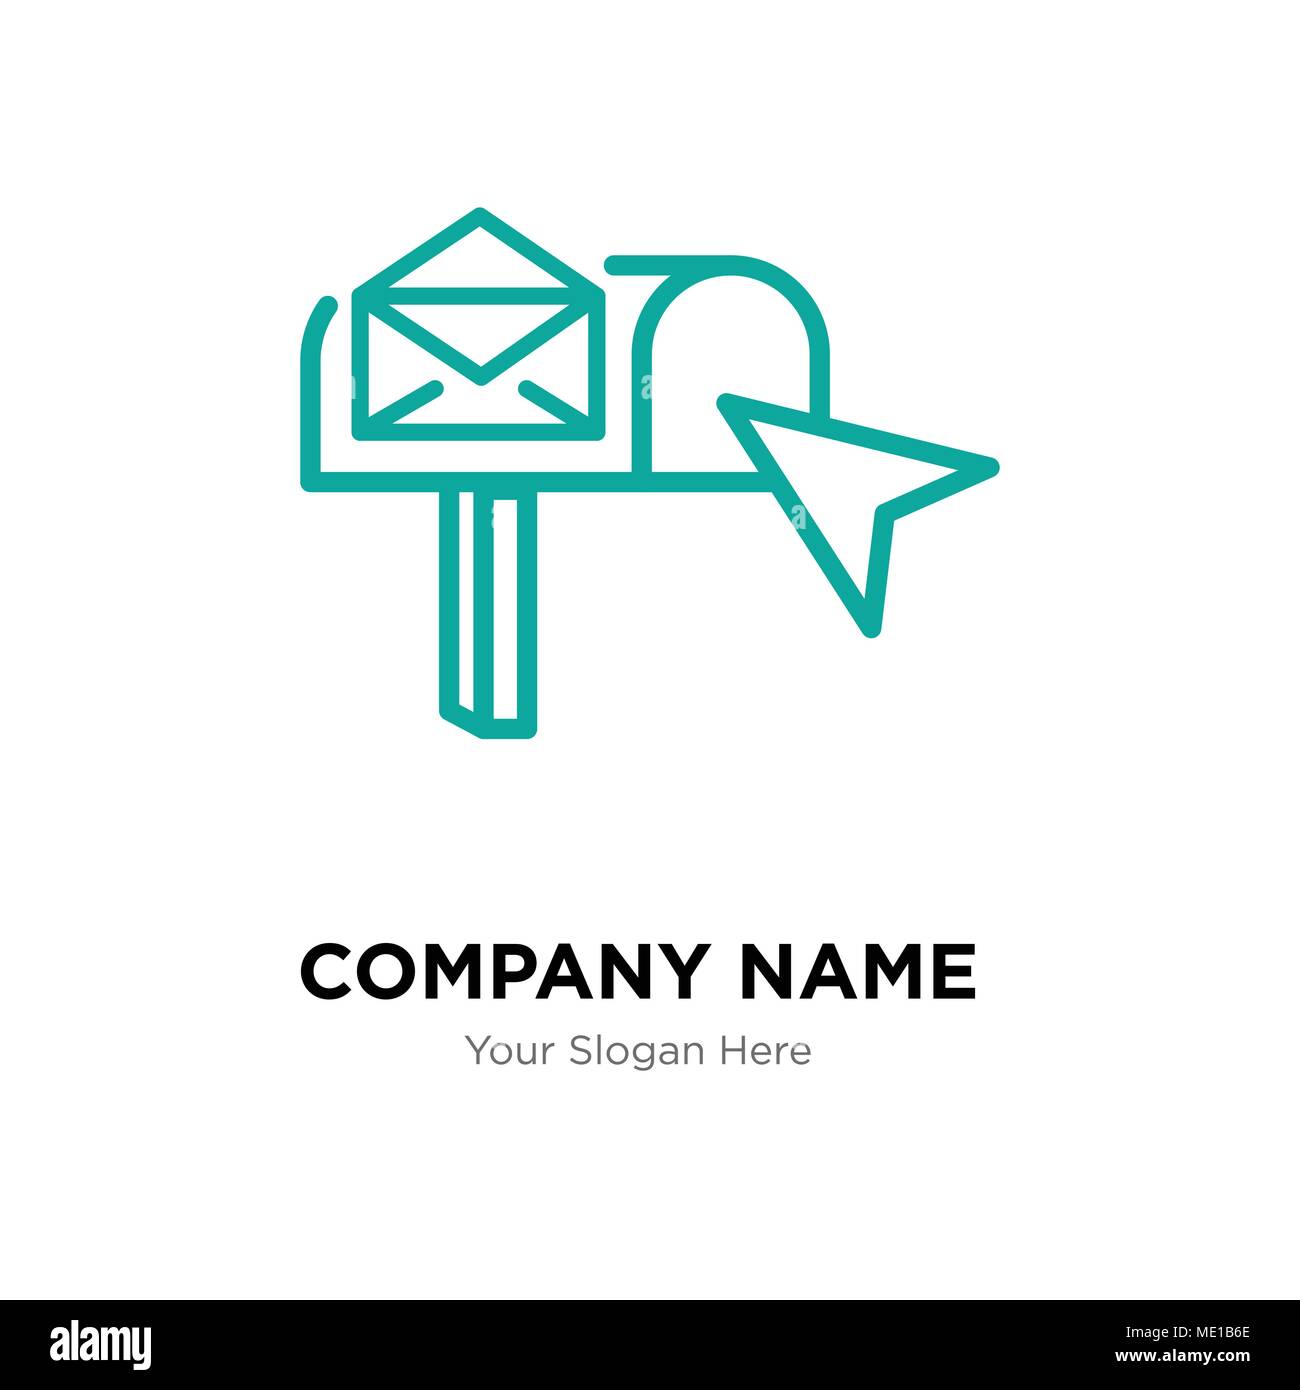 email box company logo design template, Business corporate vector icon Stock Vector